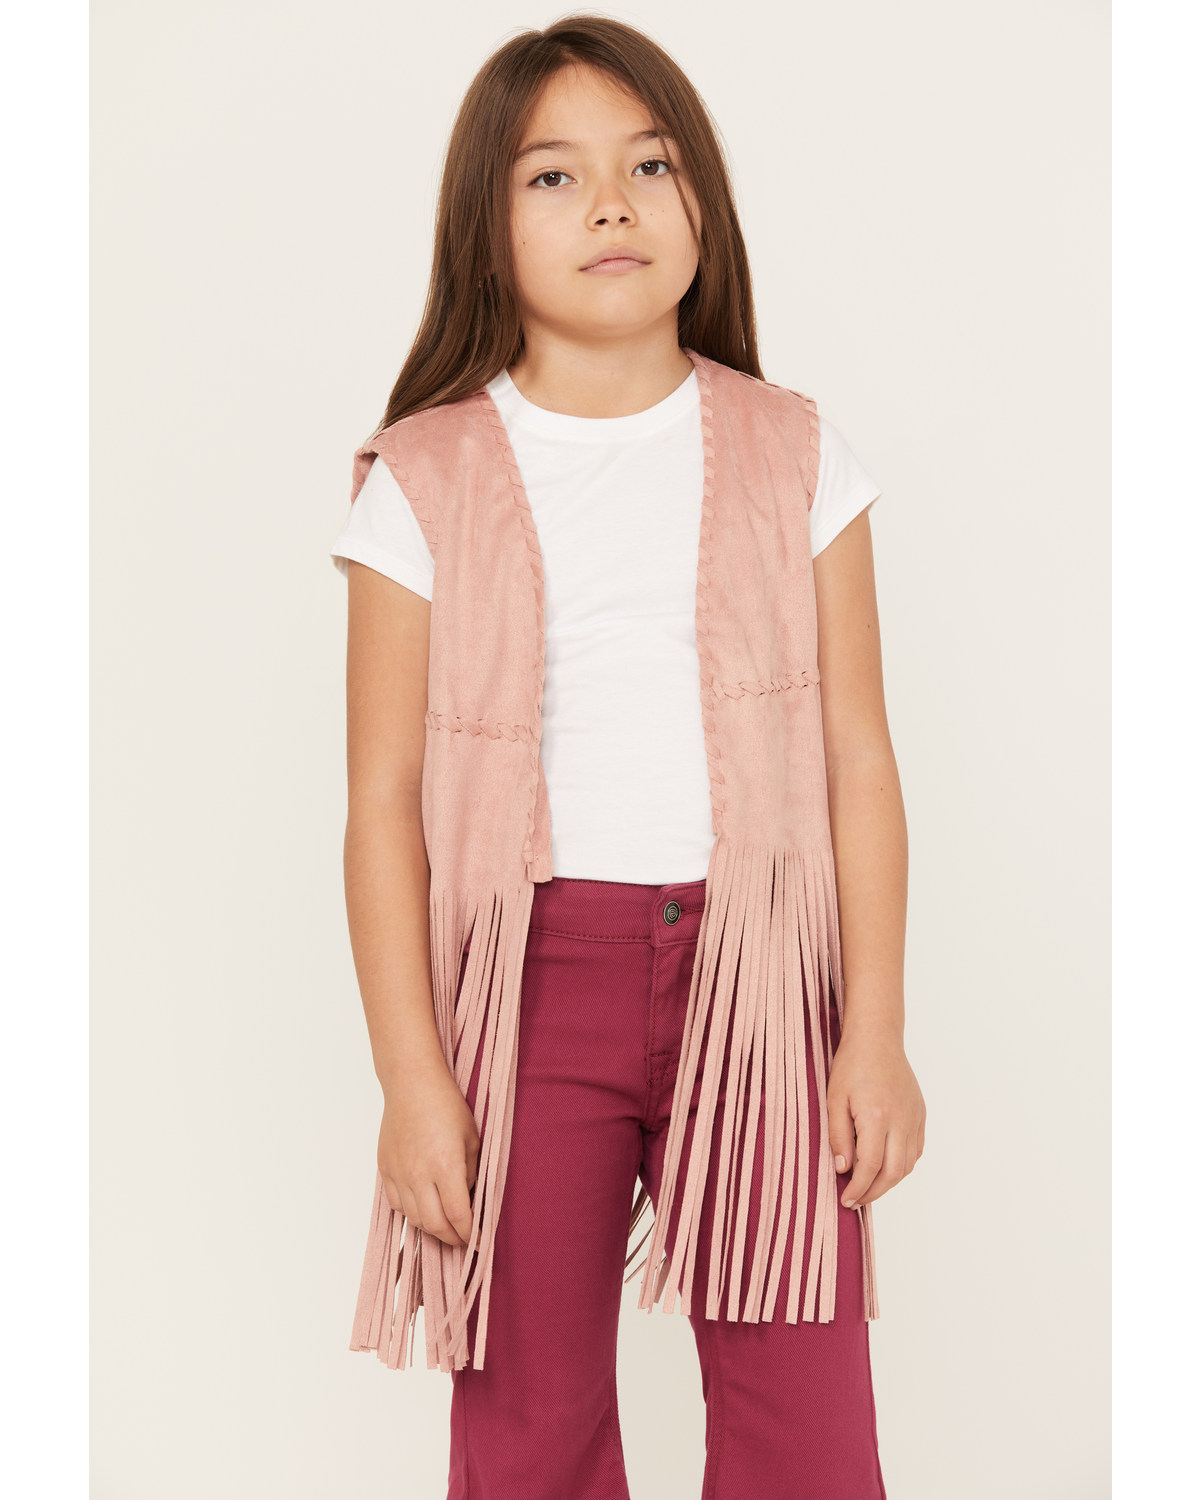 Fornia Girls' Fringe Faux Suede Vest